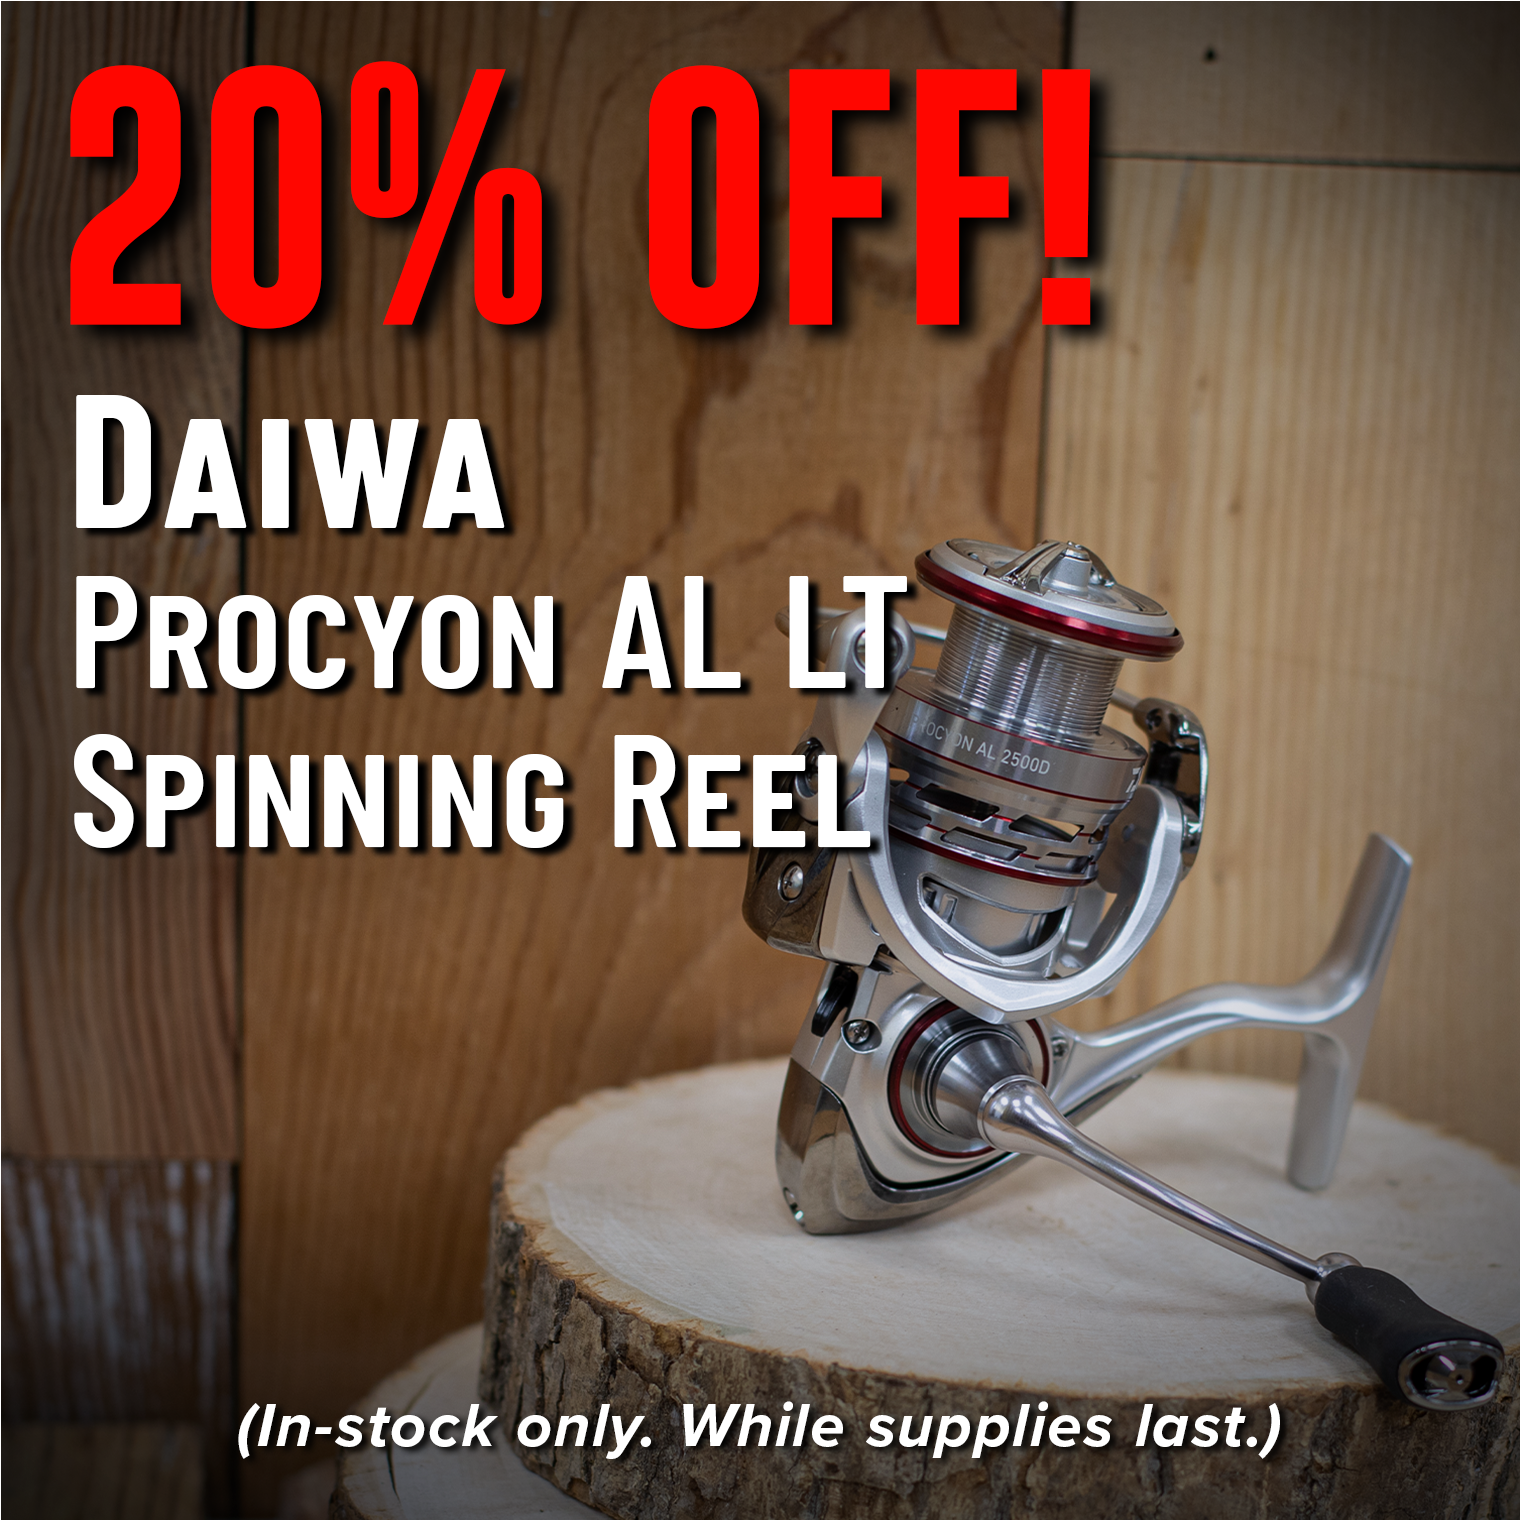 20% Off! Daiwa Procyon AL LT Spinning Reel (In-stock only. While supplies last.)